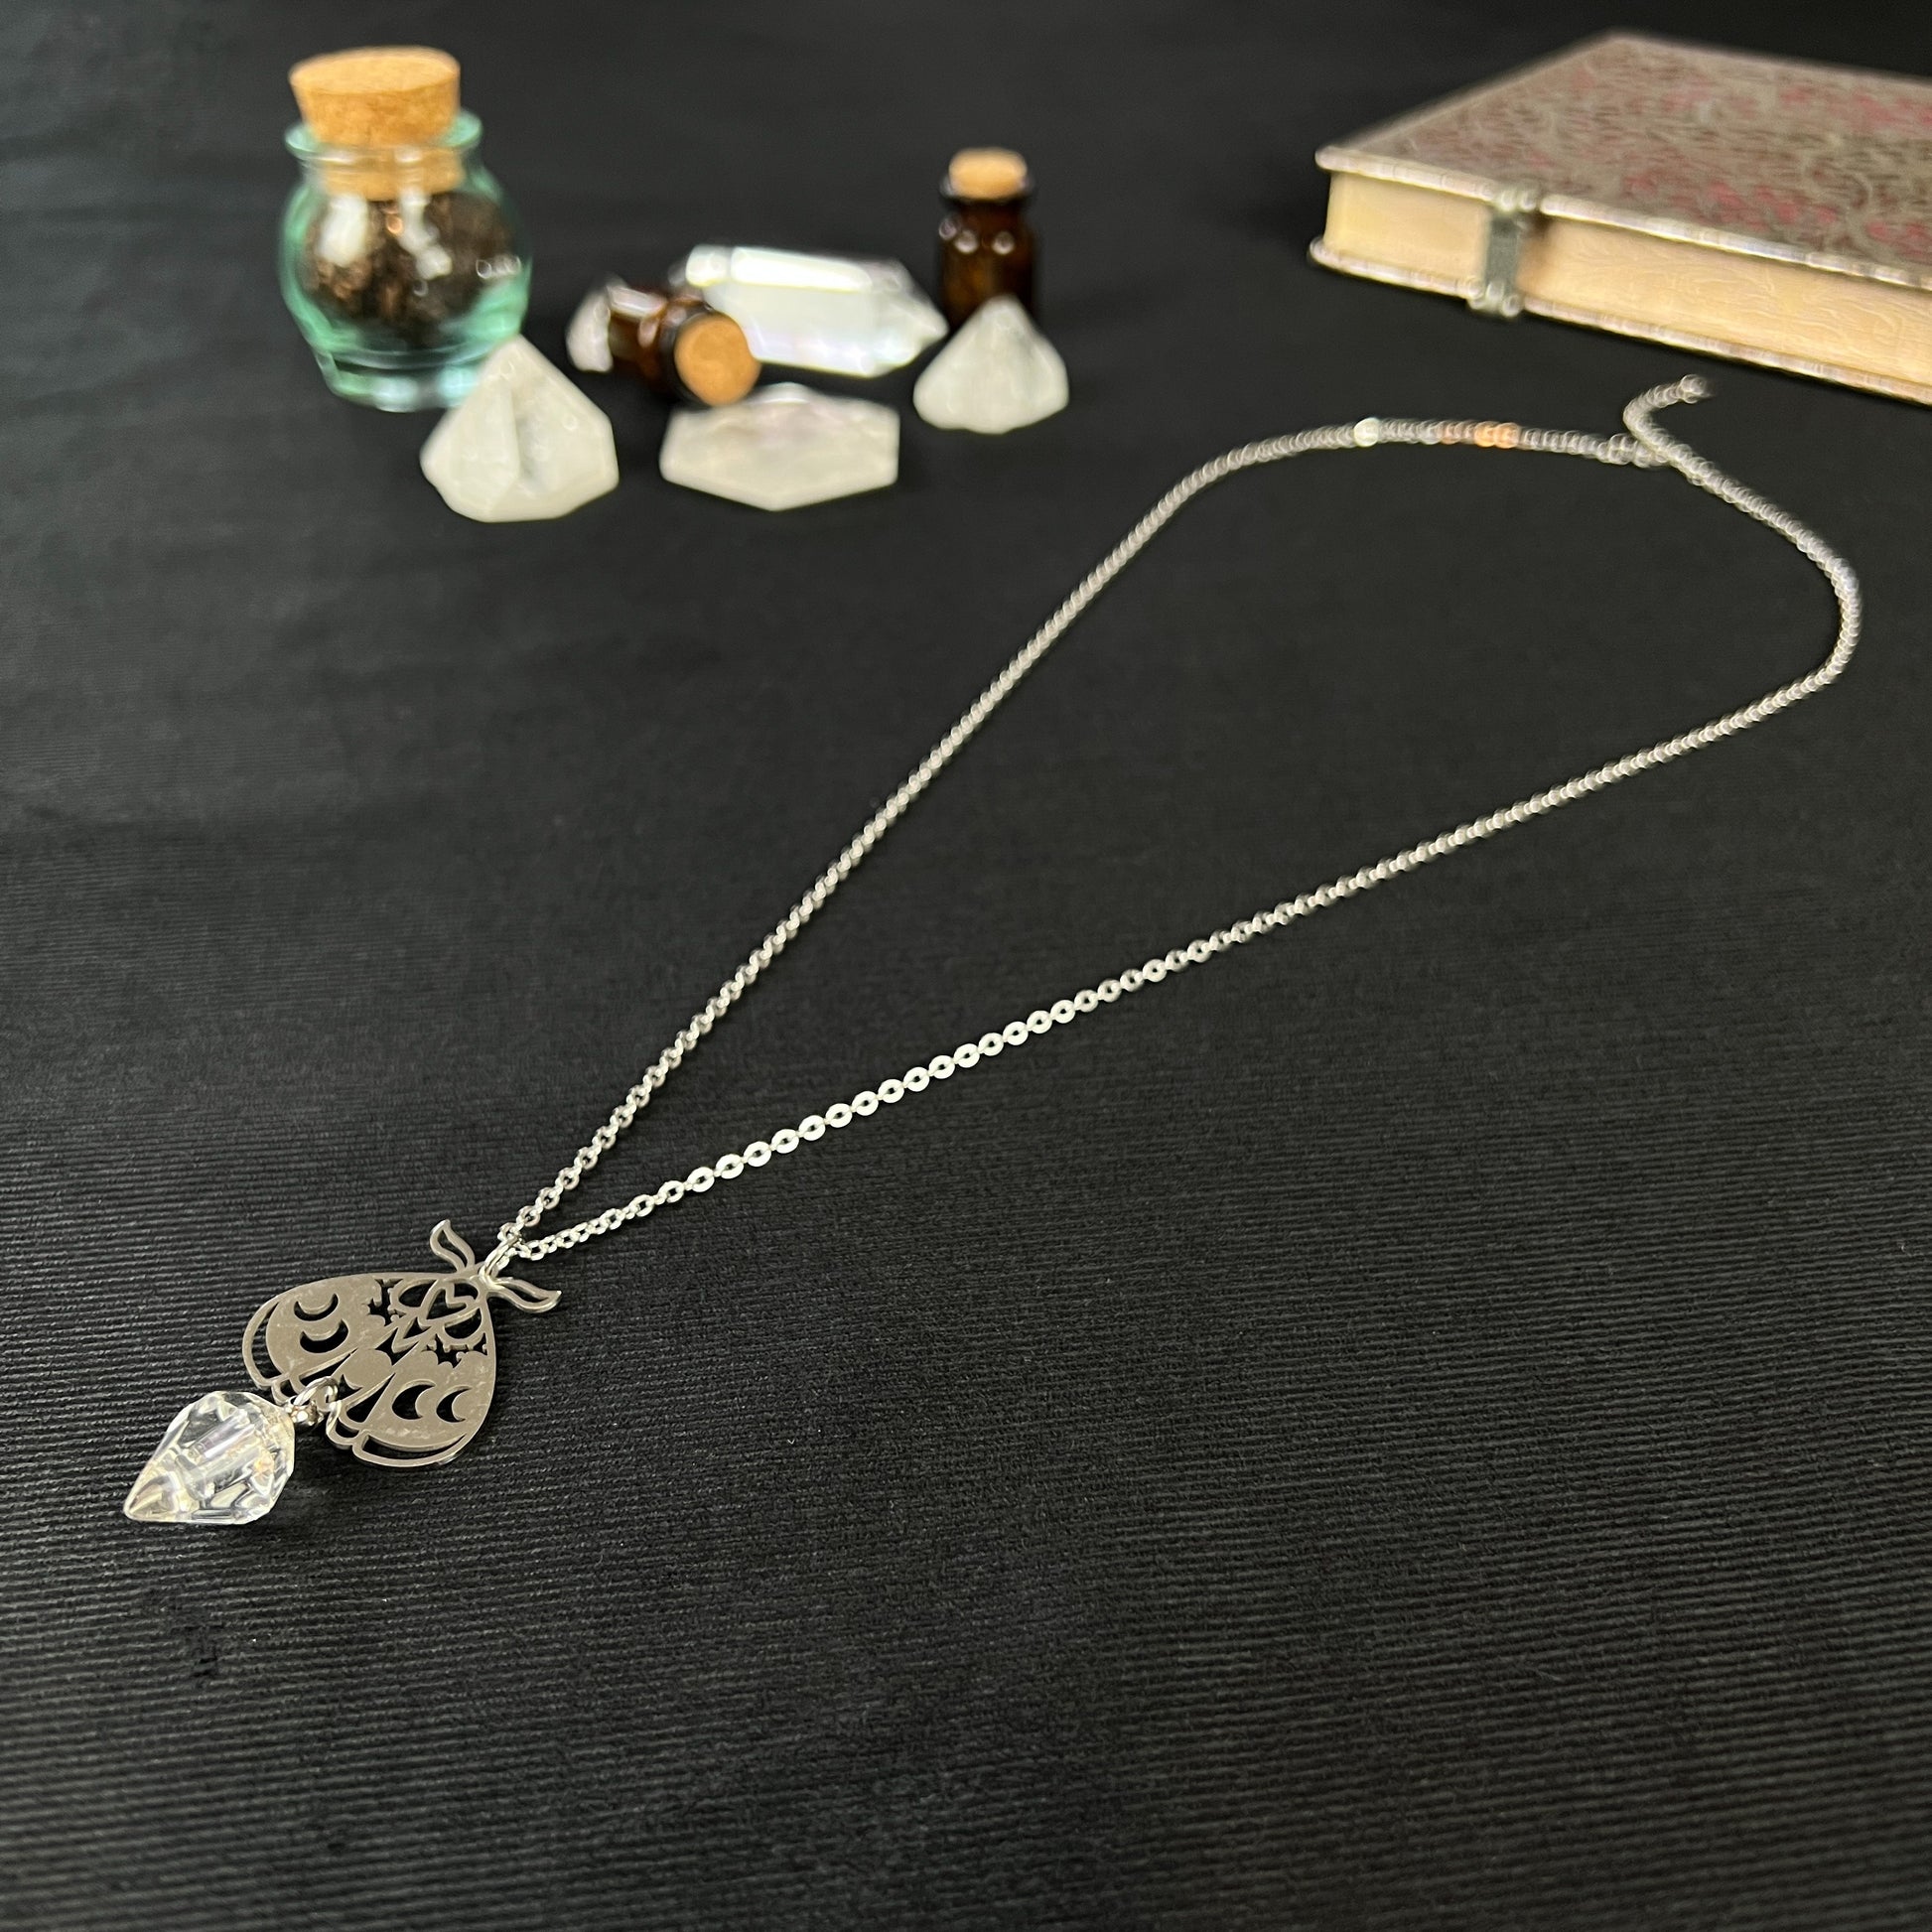 Moth and bottle pendant necklace vial potion necklace made of stainless steel witchcraft pagan wiccan jewelry with moon phases